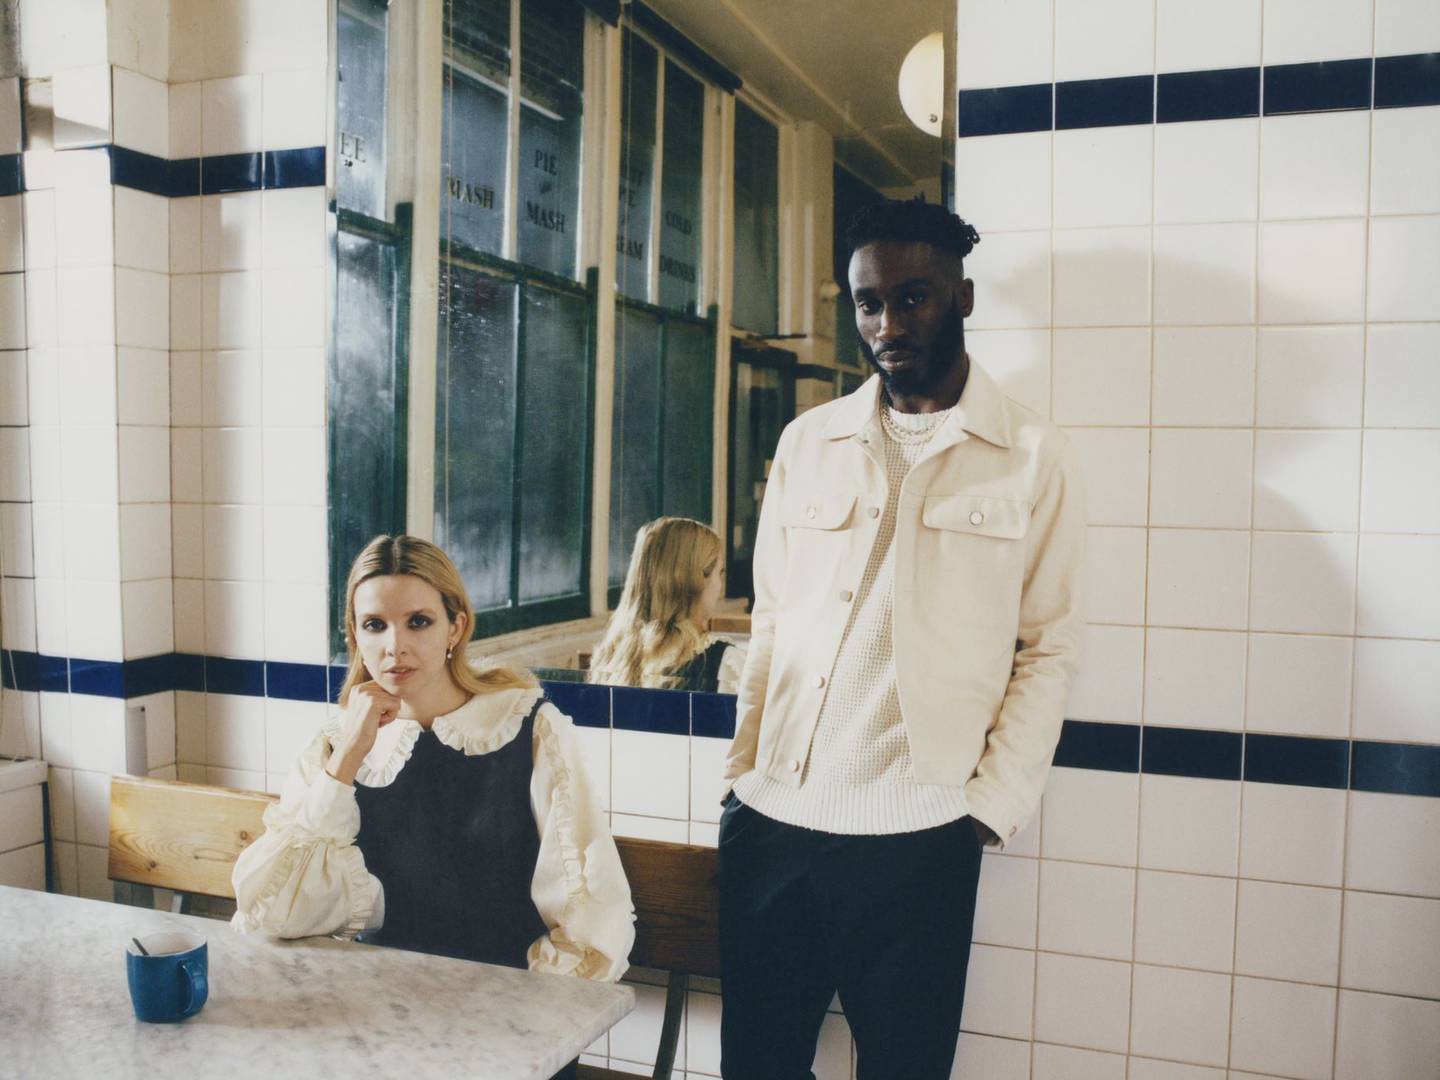 Artists Kojey Radical and Greta Bellamacina, who appear in Ted Baker's spring campaign, are the first guests in the brand's upcoming Clubhouse session. Courtesy.